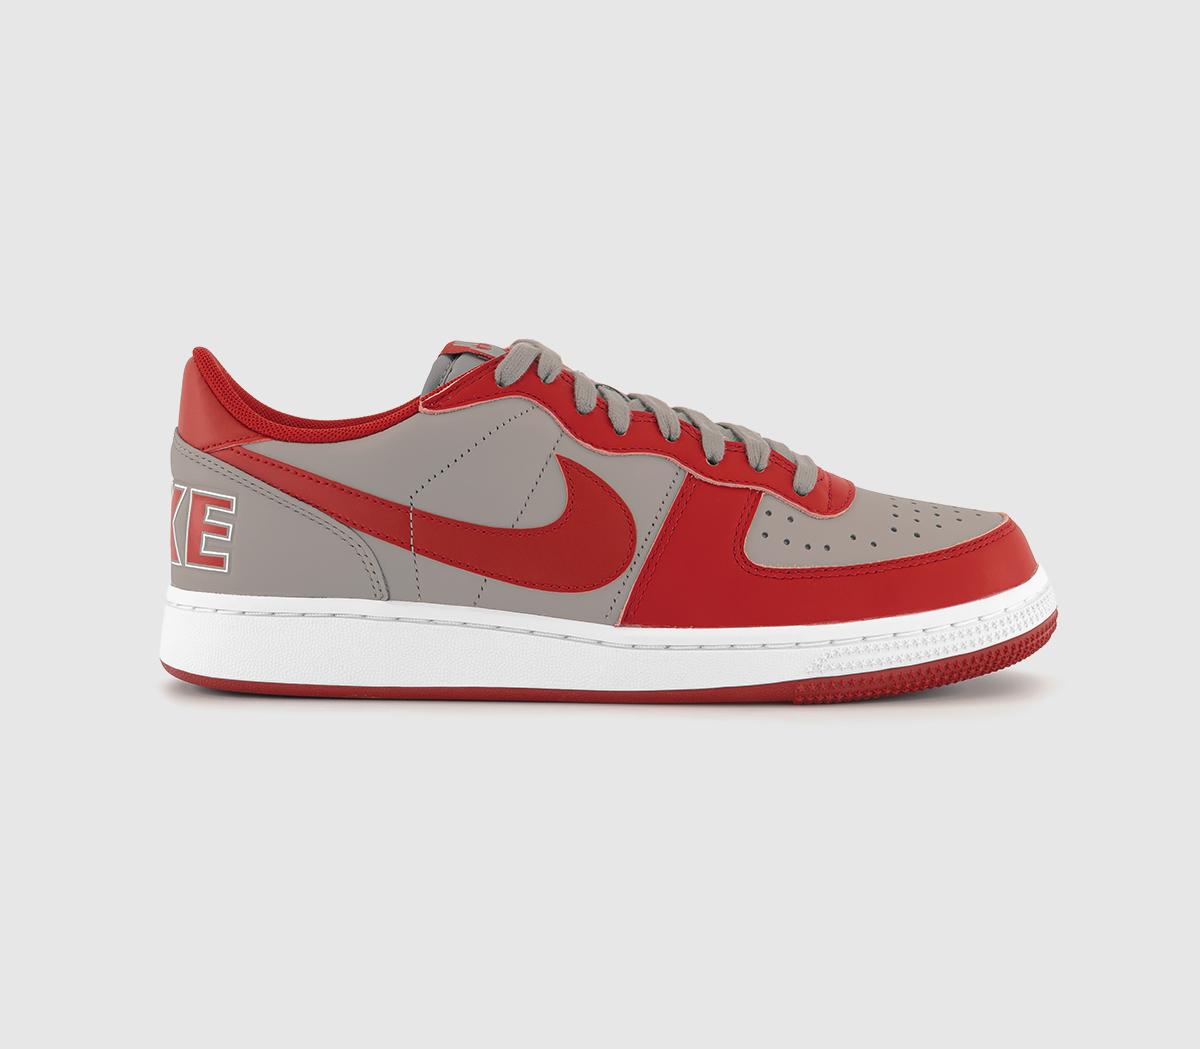 Nike Mens Terminator Low Trainers Med Grey Varsity Red White, 10